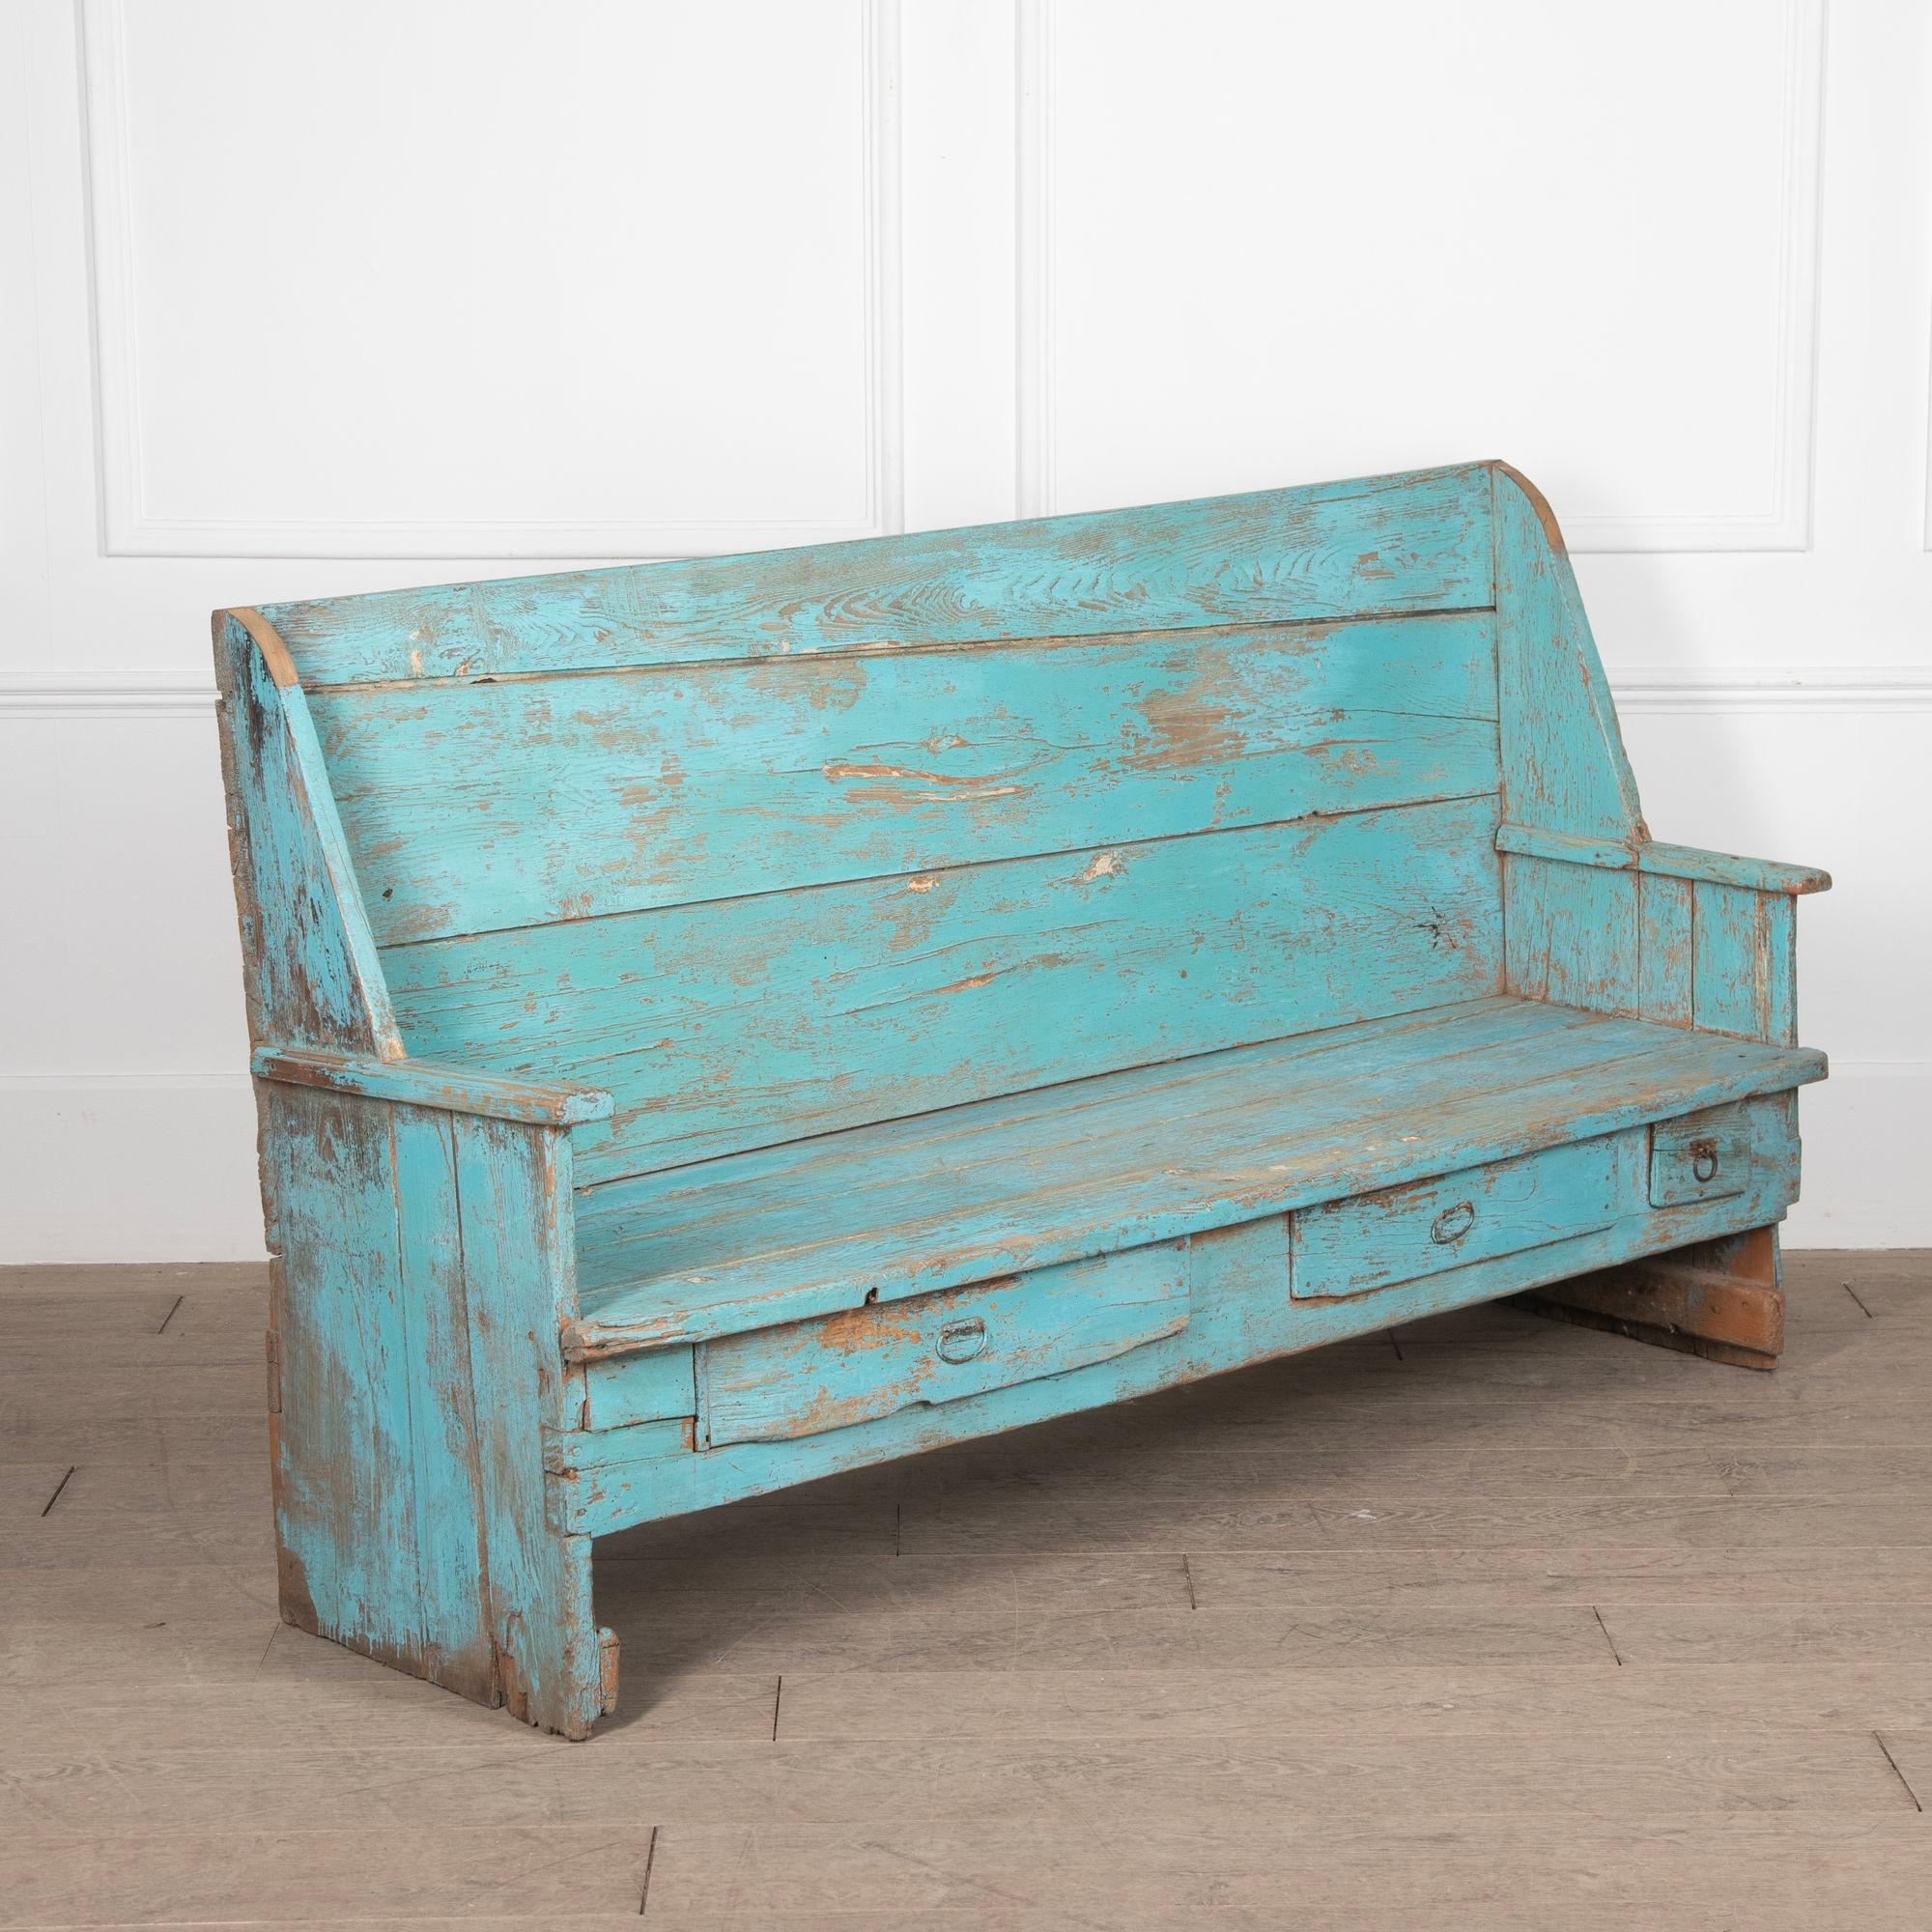 A characterful 19th Century painted provincial bench from Northern Italy with three drawers in the frieze beneath the seat.
Old but not original paint.